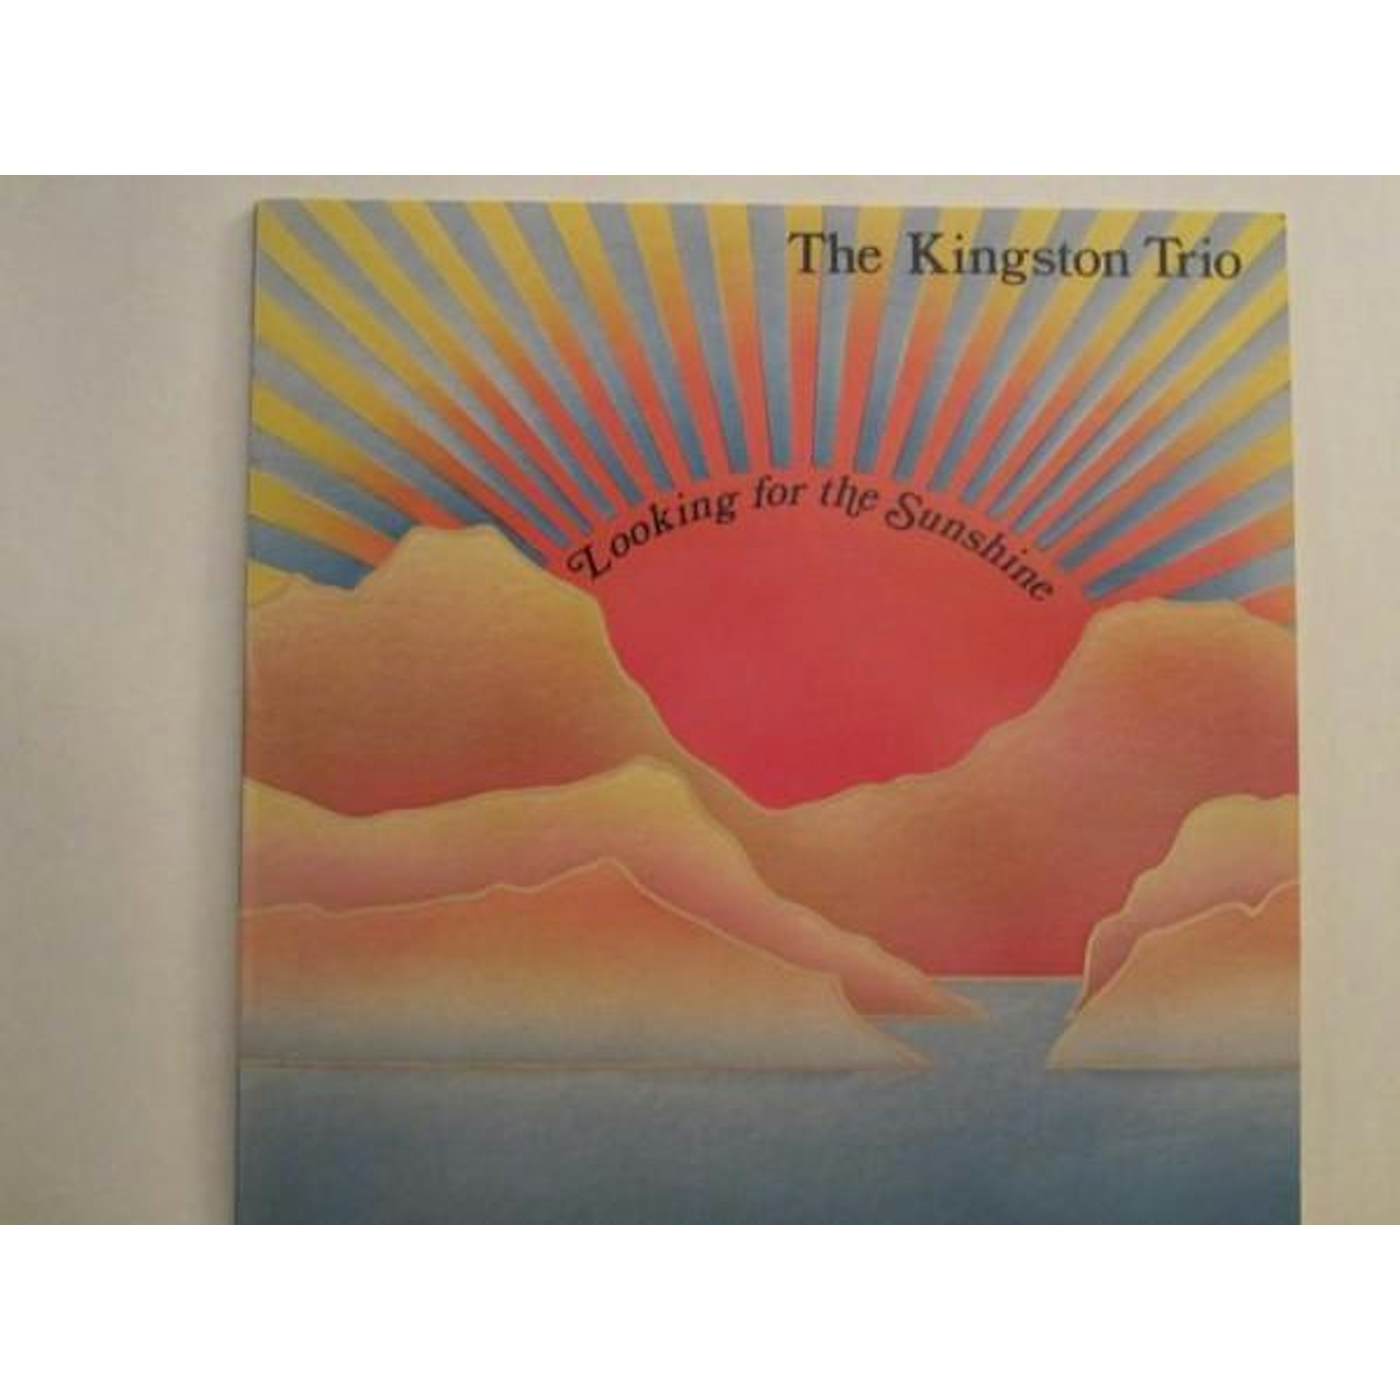 The Kingston Trio LOOKING FOR THE SUNSHINE - 1983 CD